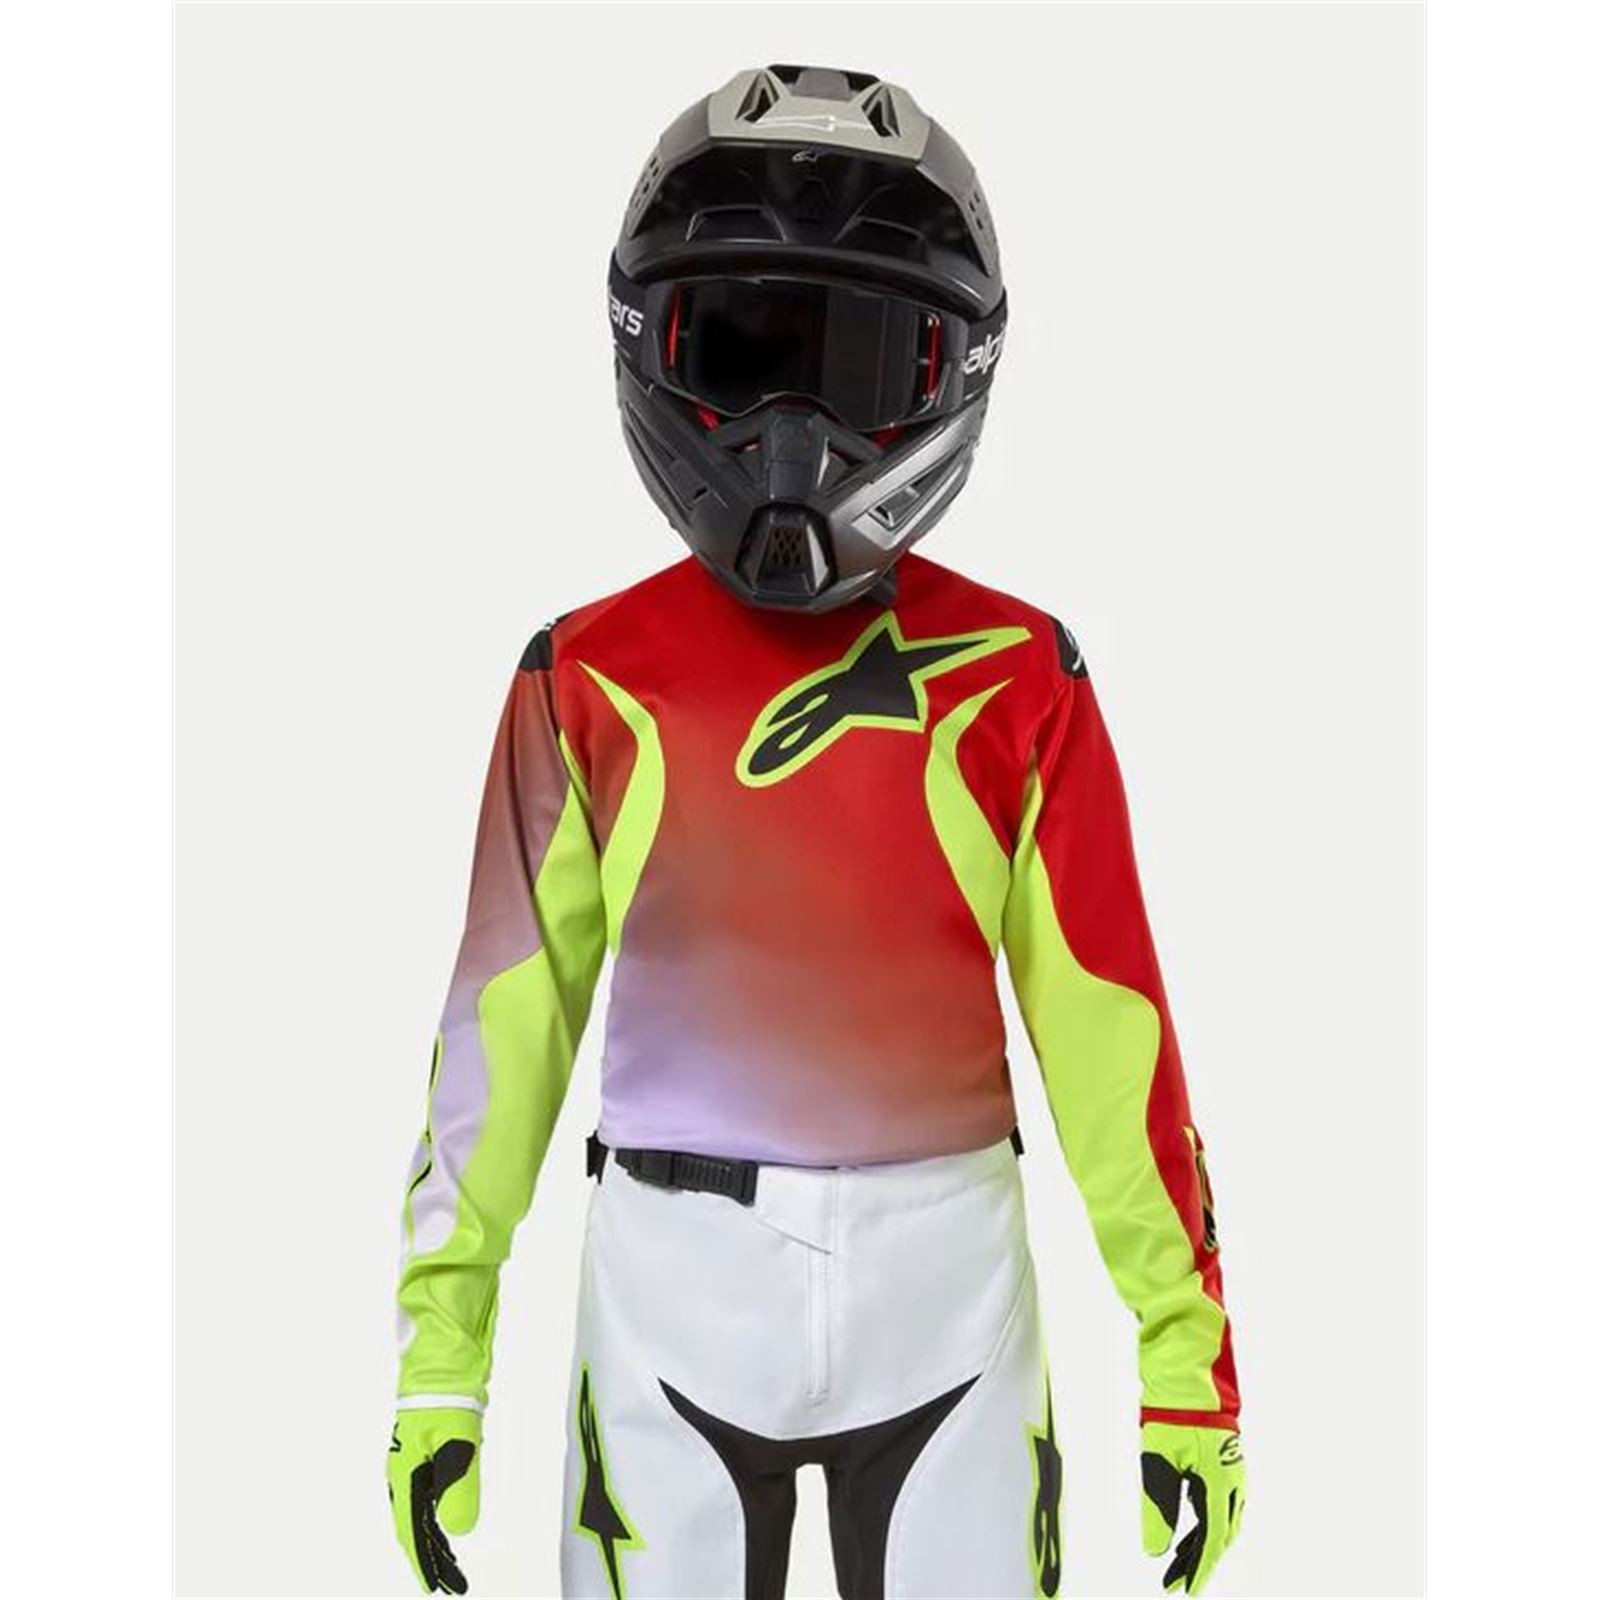 Youth Racer Lucent Jersey White/Neon Red/Yellow Fluo